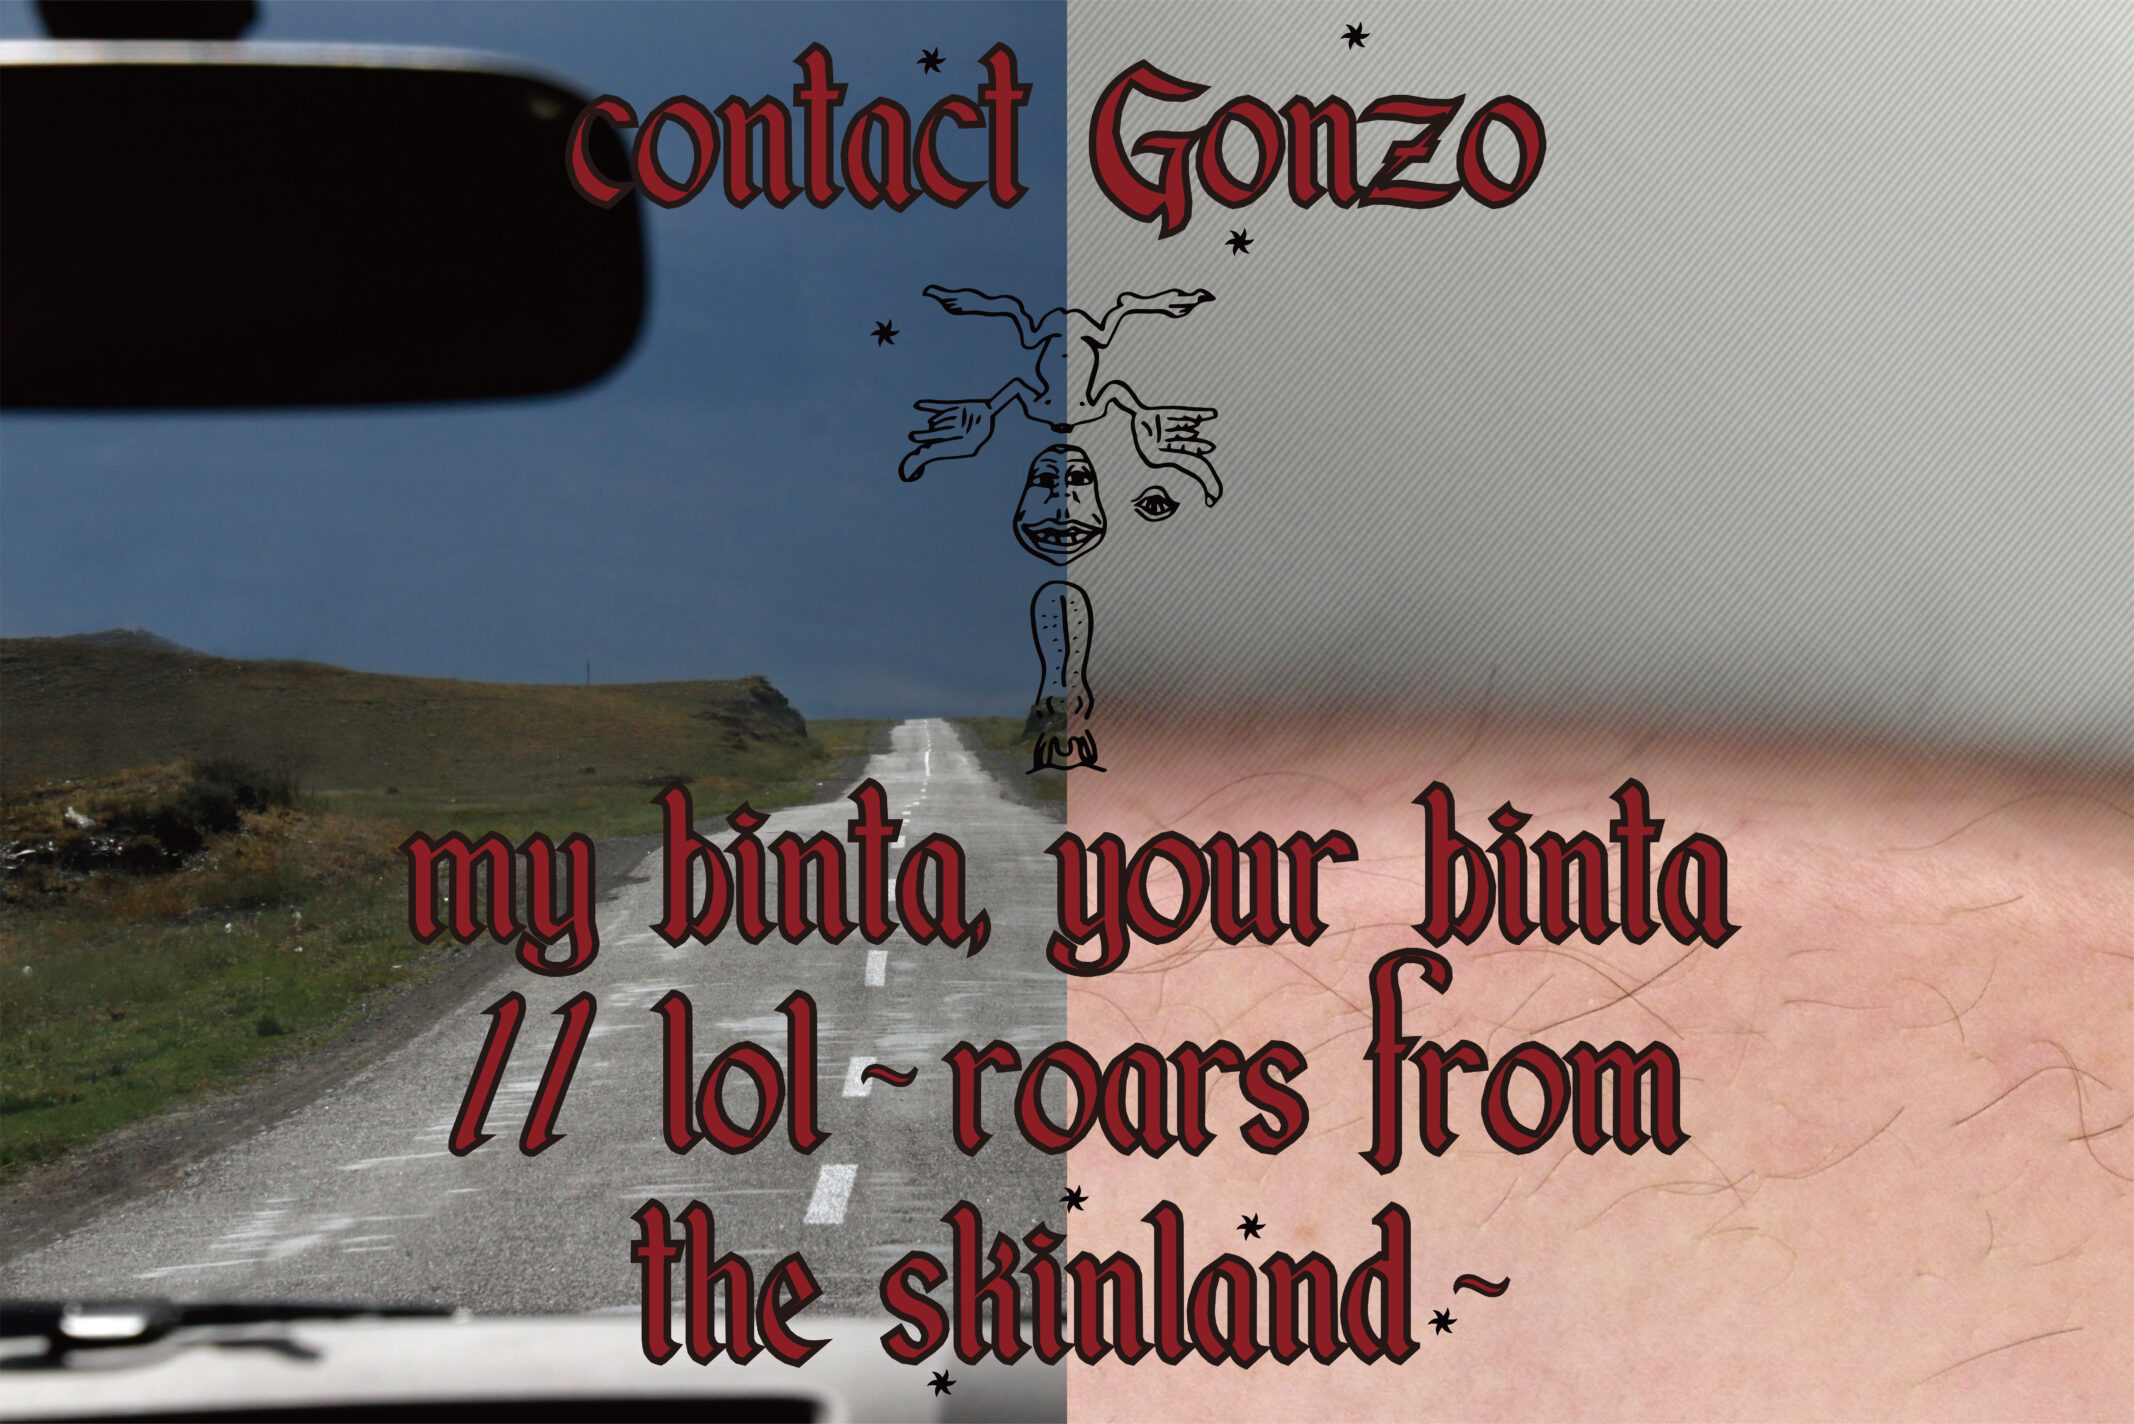 contact Gonzo パフォーマンス公演「my binta, your binta // lol ~ roars from the skinland ~」